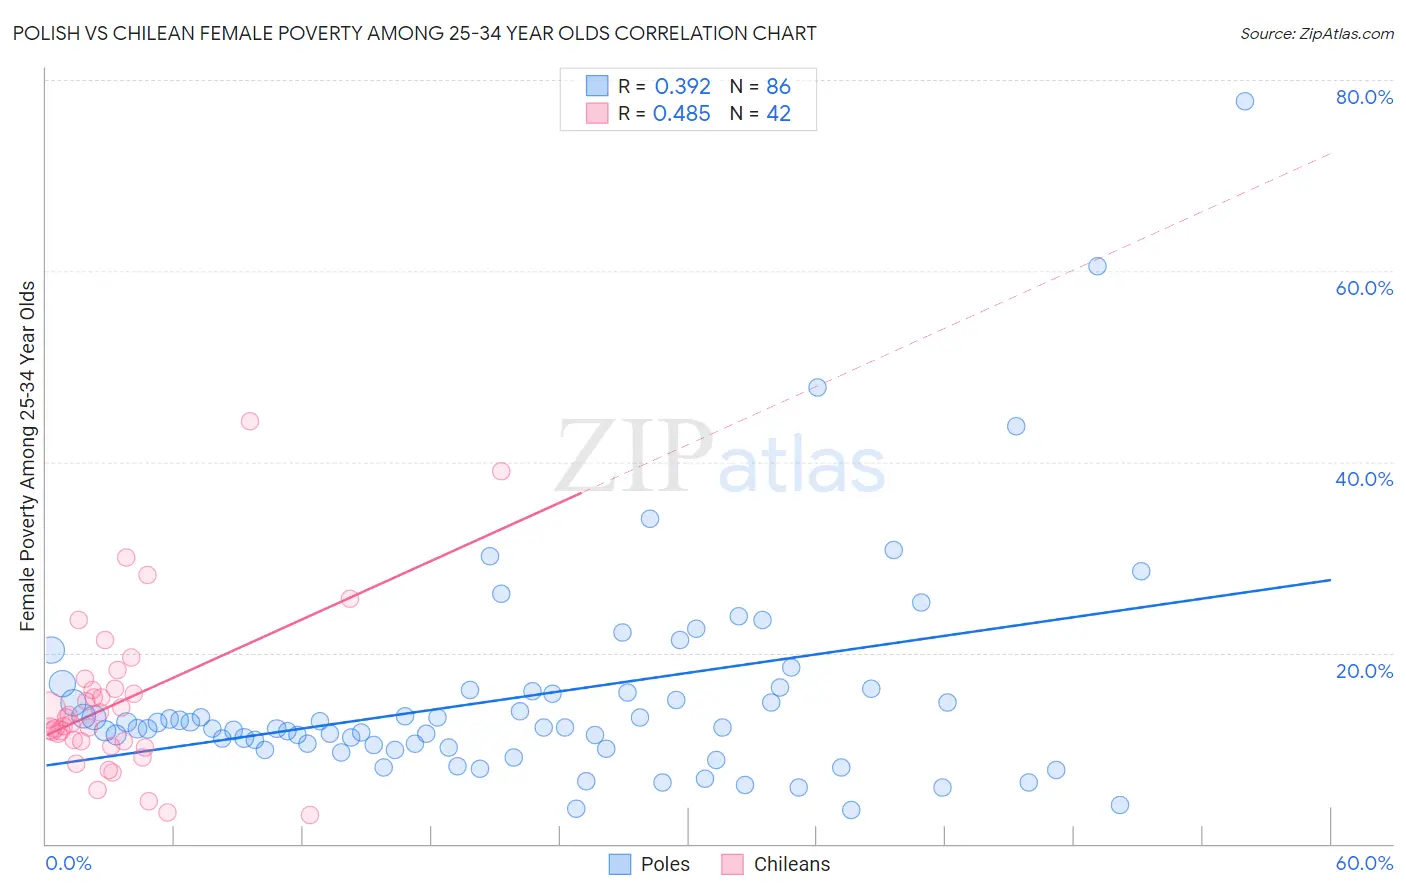 Polish vs Chilean Female Poverty Among 25-34 Year Olds